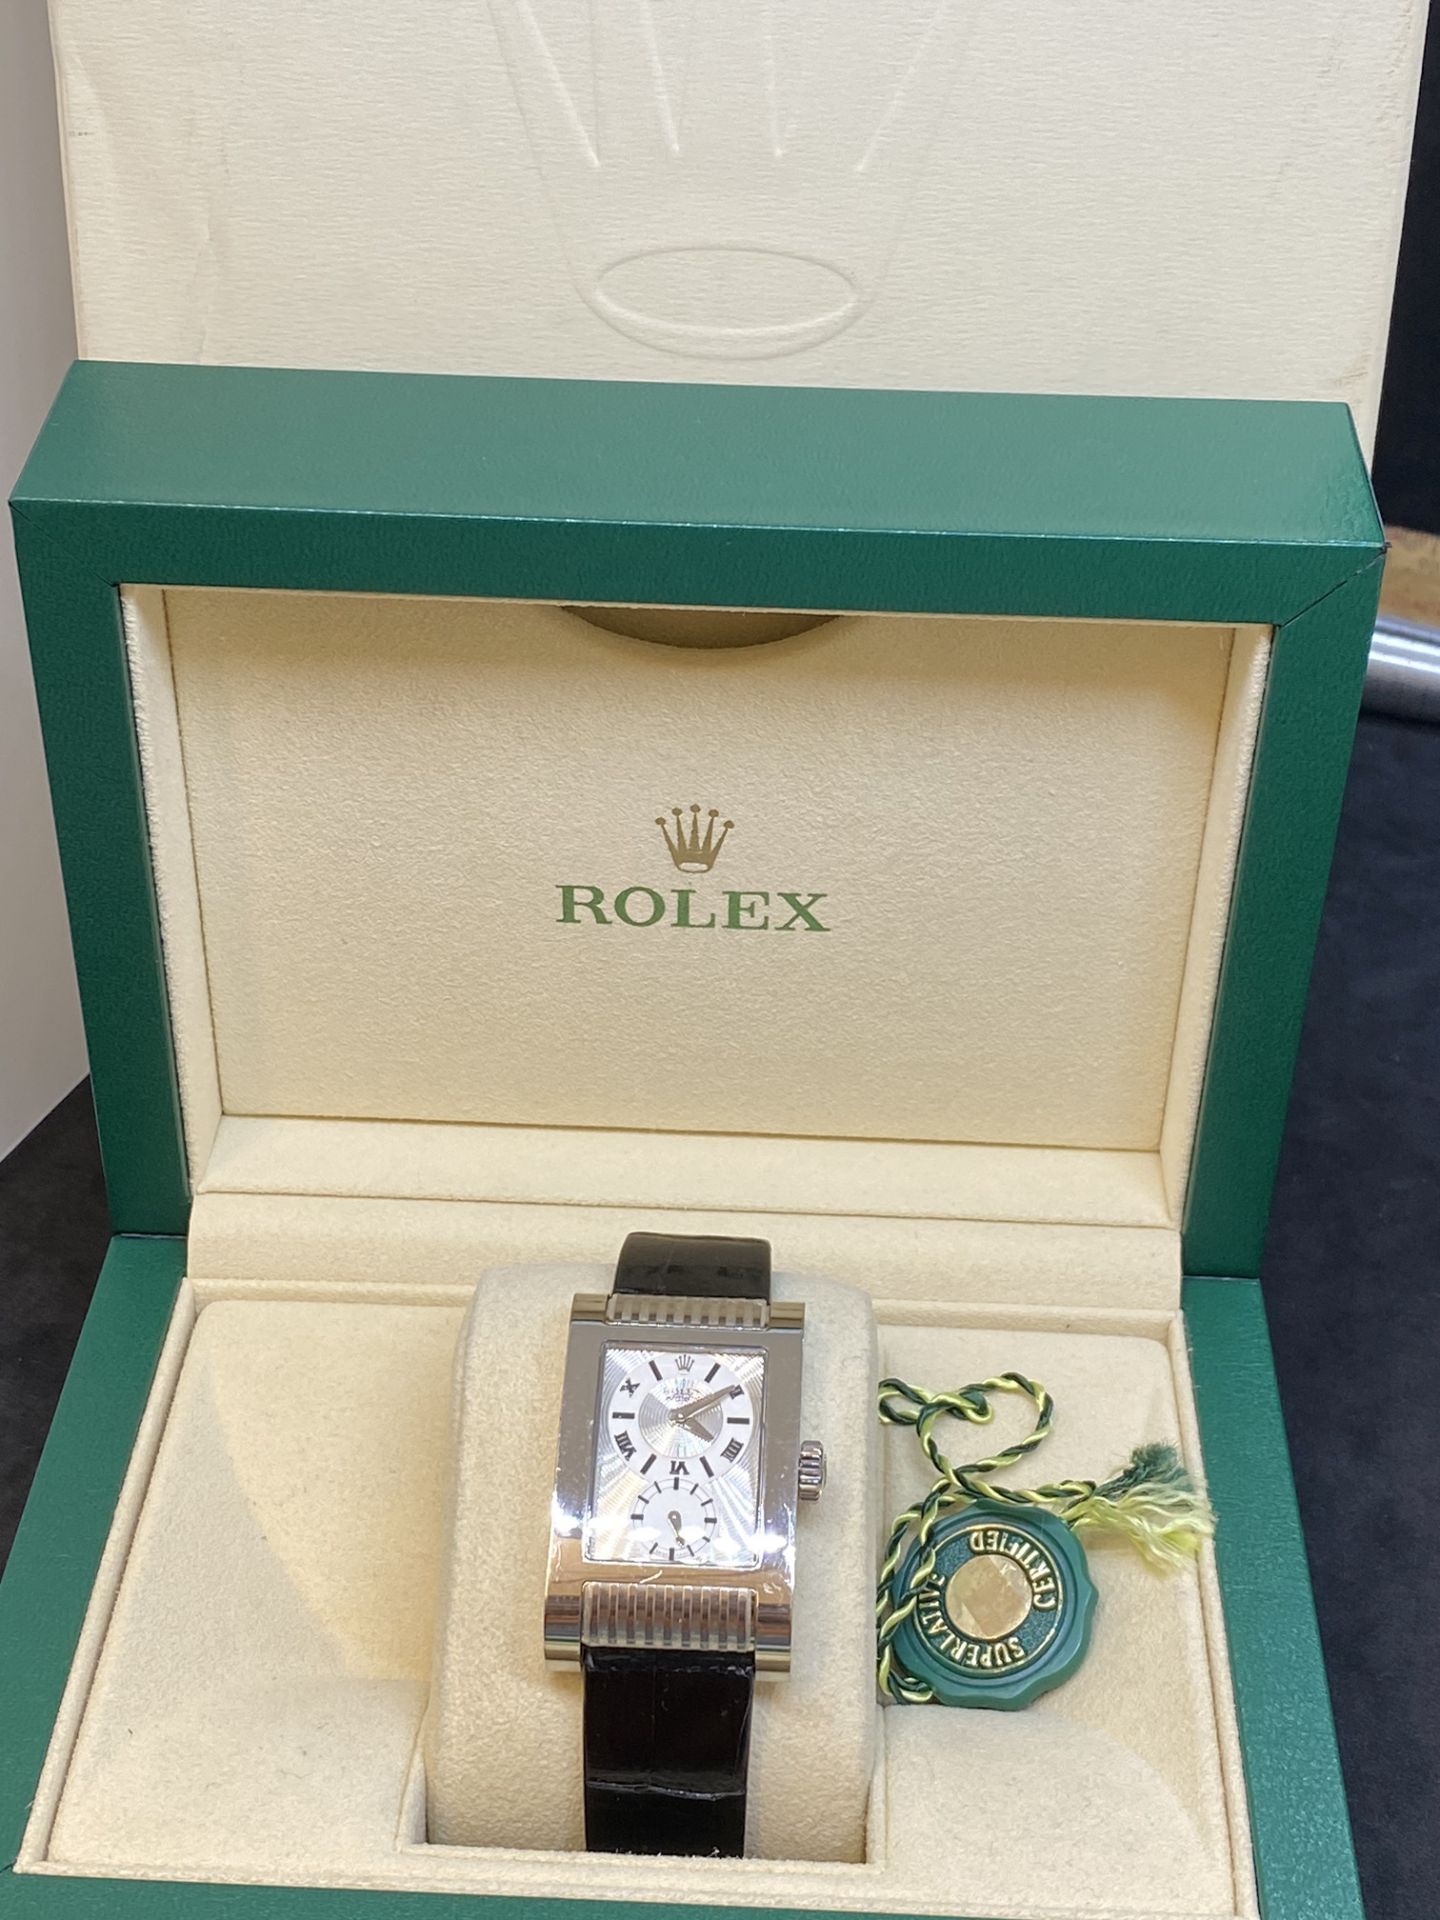 Rolex Cellini Prince 18ct White Gold 5441/9 Watch with Box